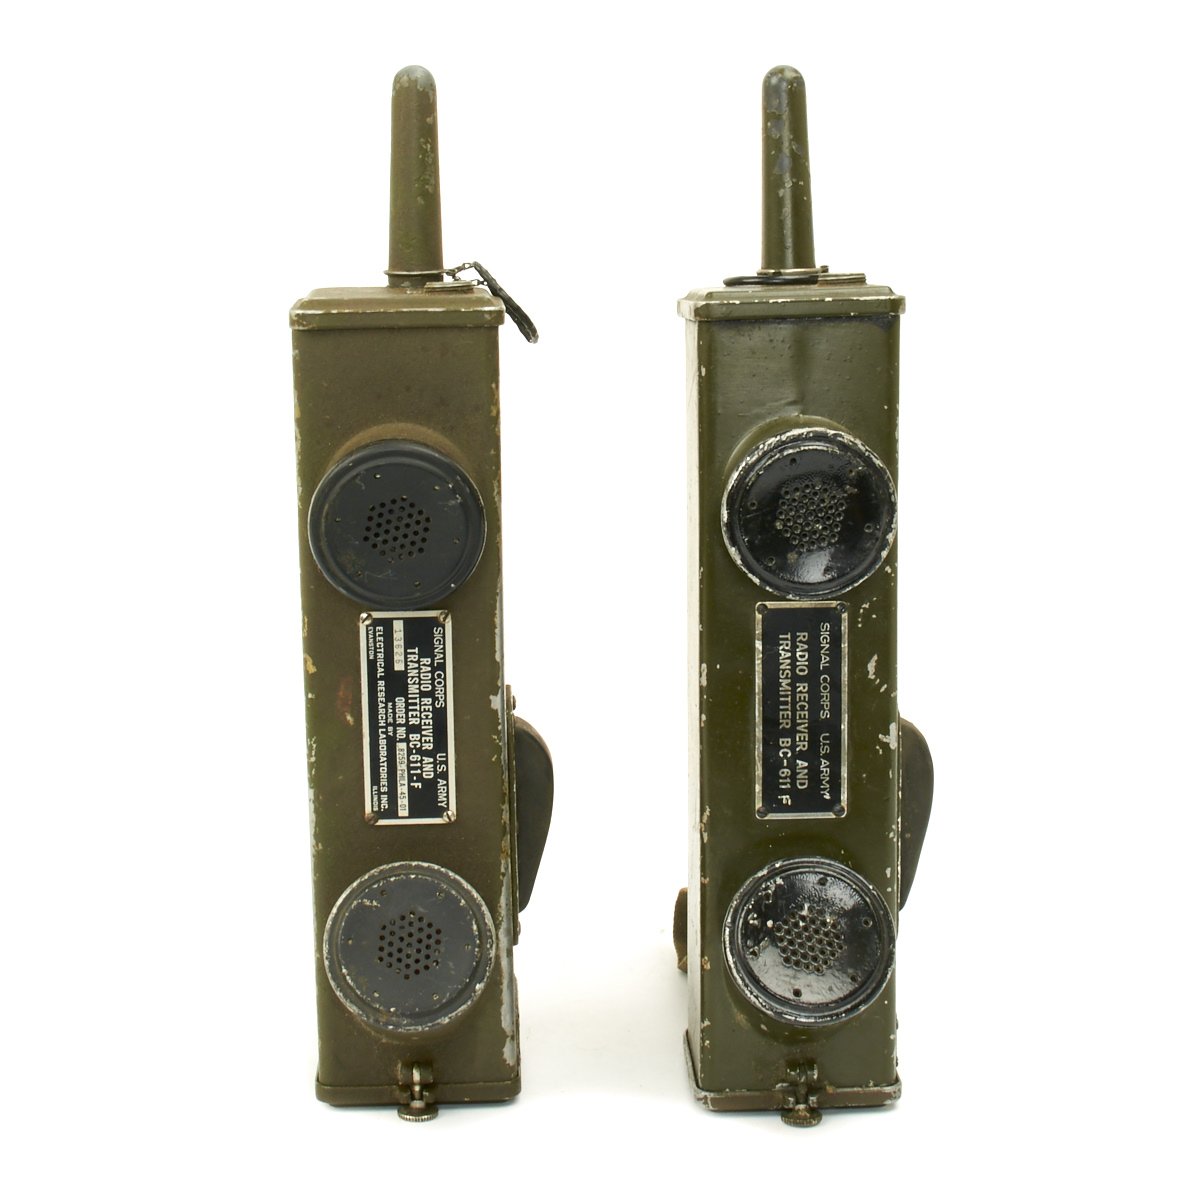 WWII US Army Signal Corps SCR-536 Hand Held Walkie Talkie Radio Transc -  Top Pots - WWII US M-1 Helmets, Liners and Reproduction Uniform Sales